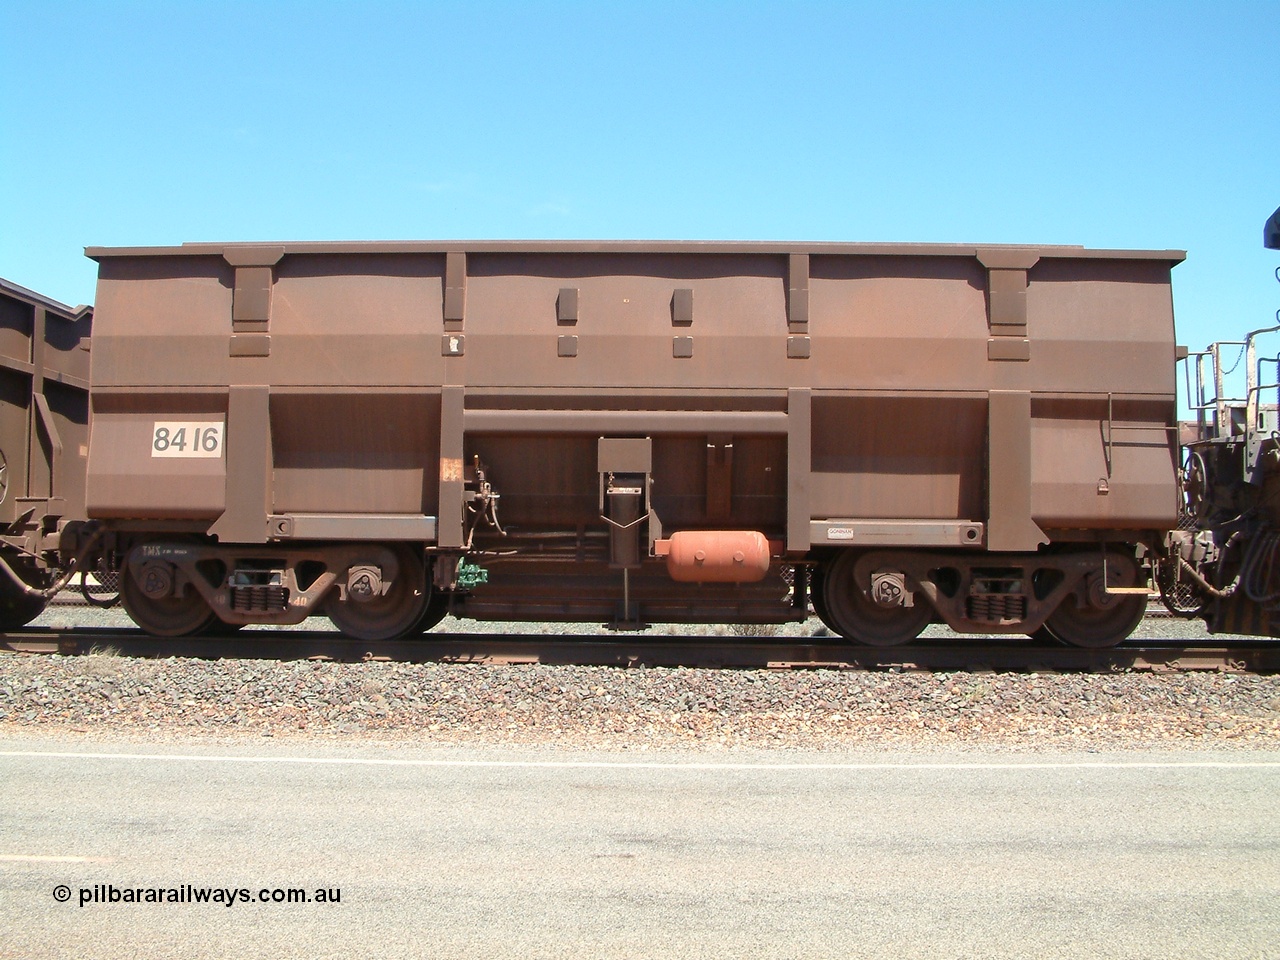 040409 121940
Boodarie, Goninan built Golynx waggon 8416 with serial number 950088-326 from November 2011, which is a modified version of the BHP mainline waggons for service on the Goldsworthy system as a bottom discharge waggon. 9th of April 2004.
Keywords: 8416;Goninan-WA;Golynx;950088-326;BHP-ore-waggon;